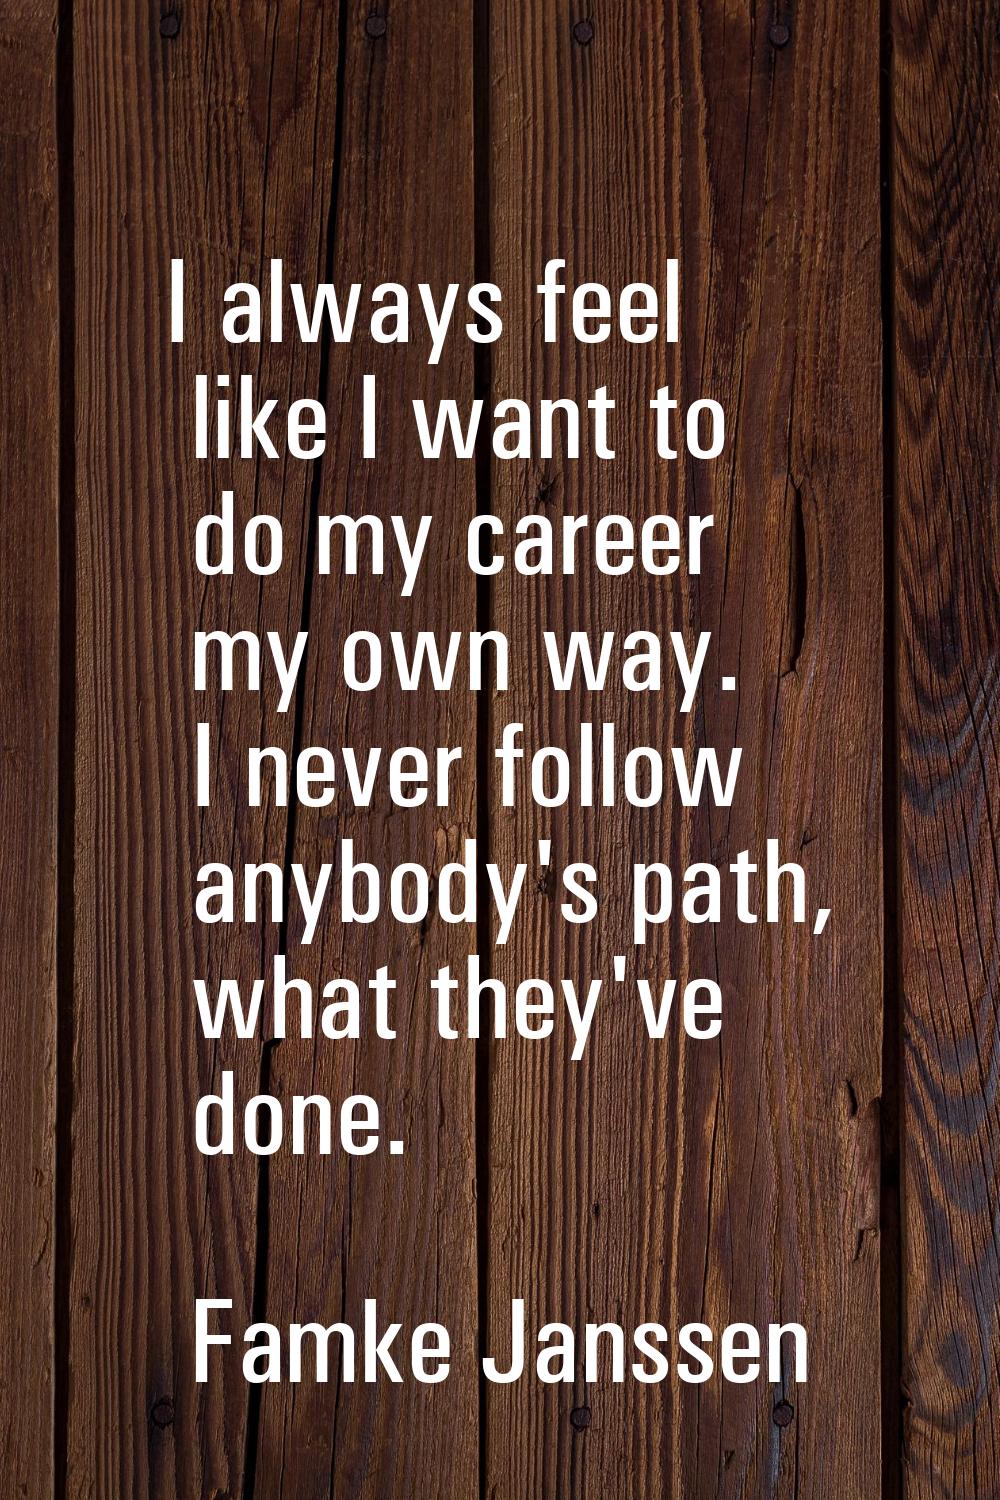 I always feel like I want to do my career my own way. I never follow anybody's path, what they've d